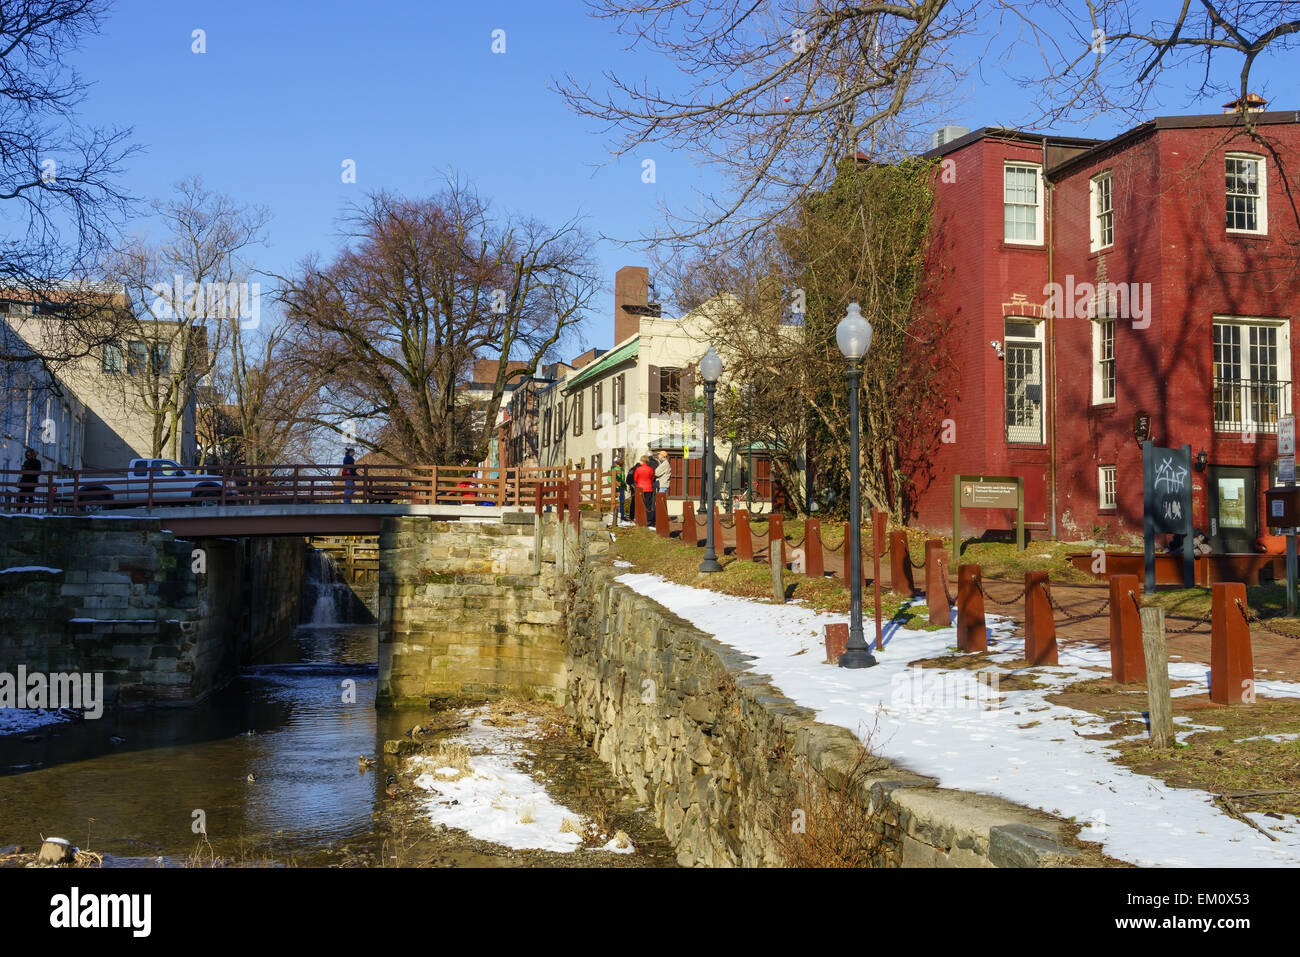 Colorful old houses beside the Chesapeake and Ohio (C&O) canal in the historic area of Georgetown, Washington DC, USA. Stock Photo